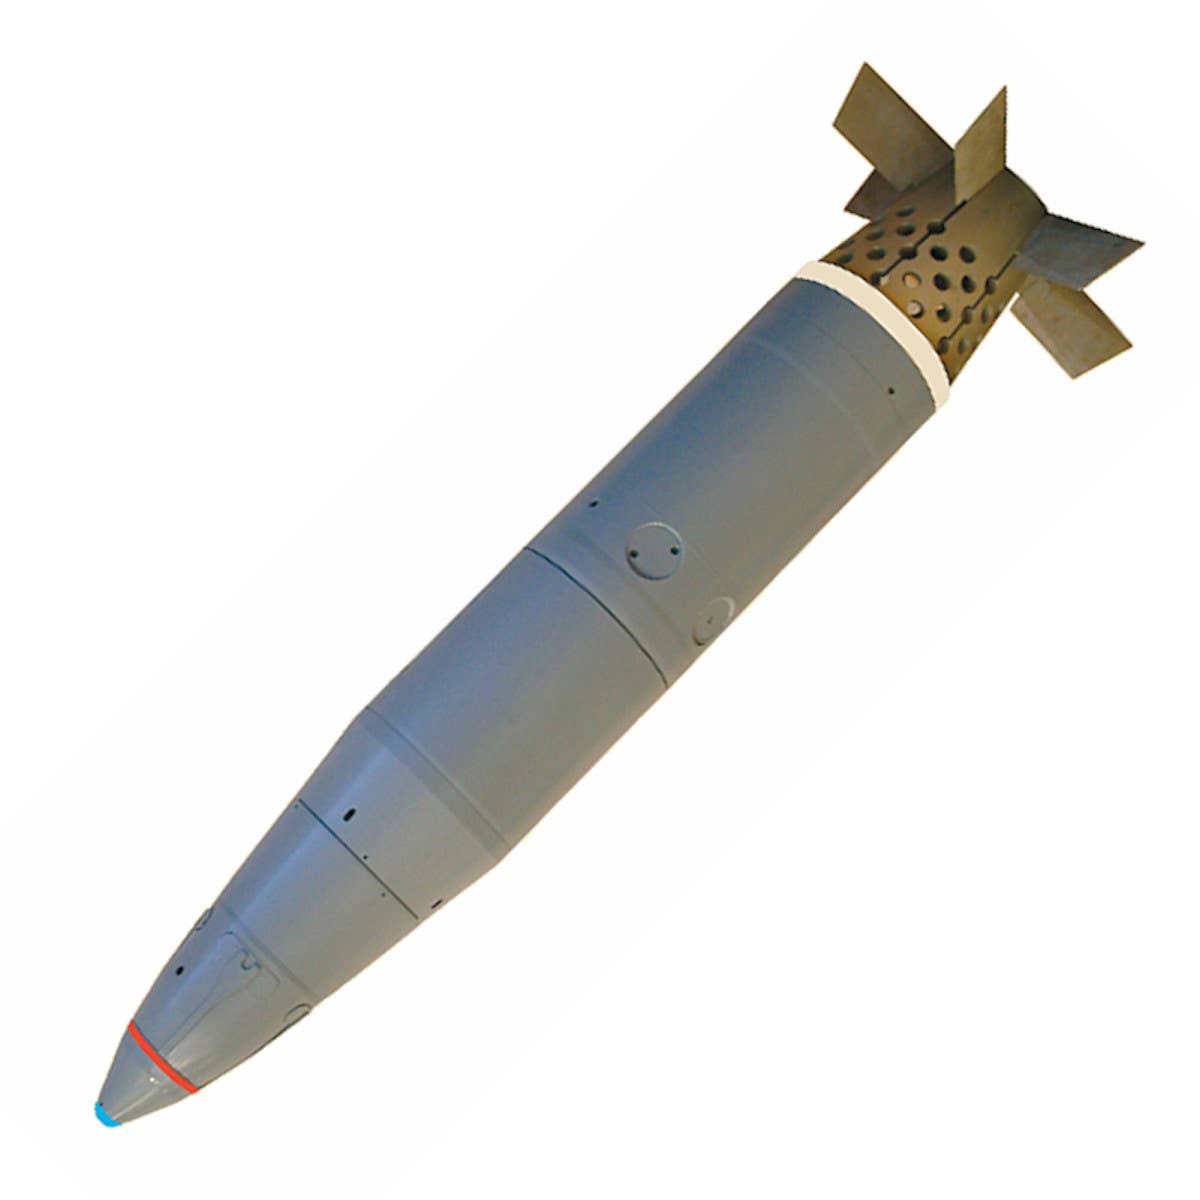 An example of a Smel'chak laser-guided 240mm round for the 2S4 self-propelled mortar. <em>CAT-UXO</em>